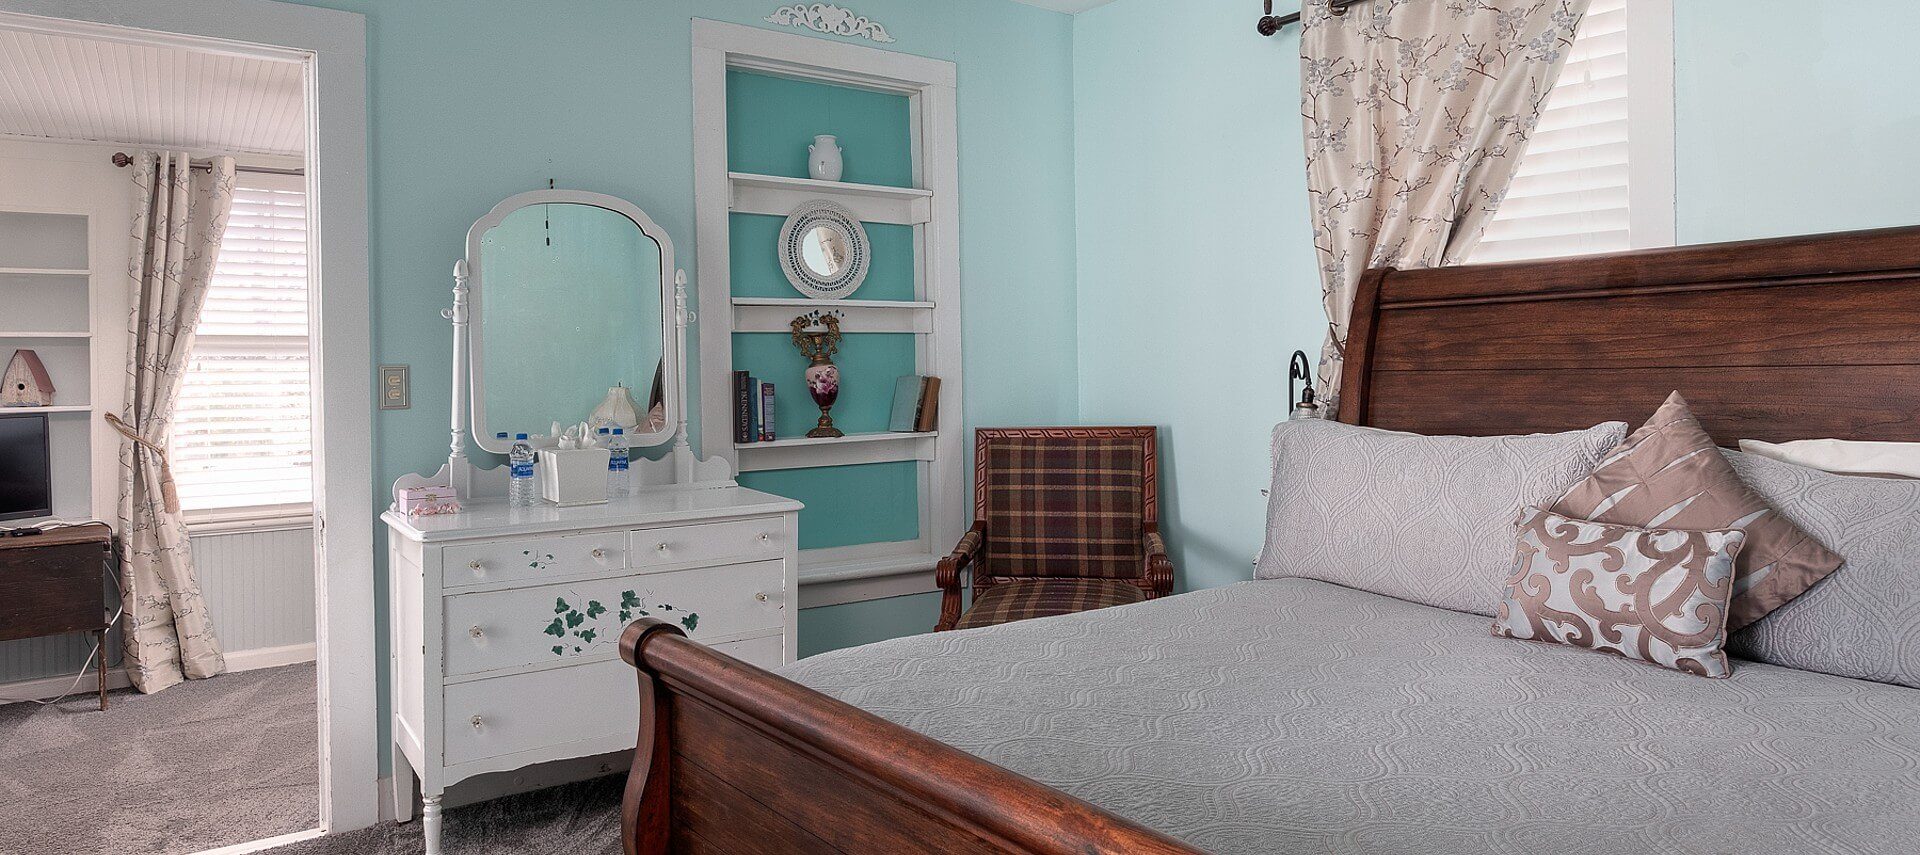 Guestroom with sleigh bed, white dresser with mirror, and doorway into sitting room